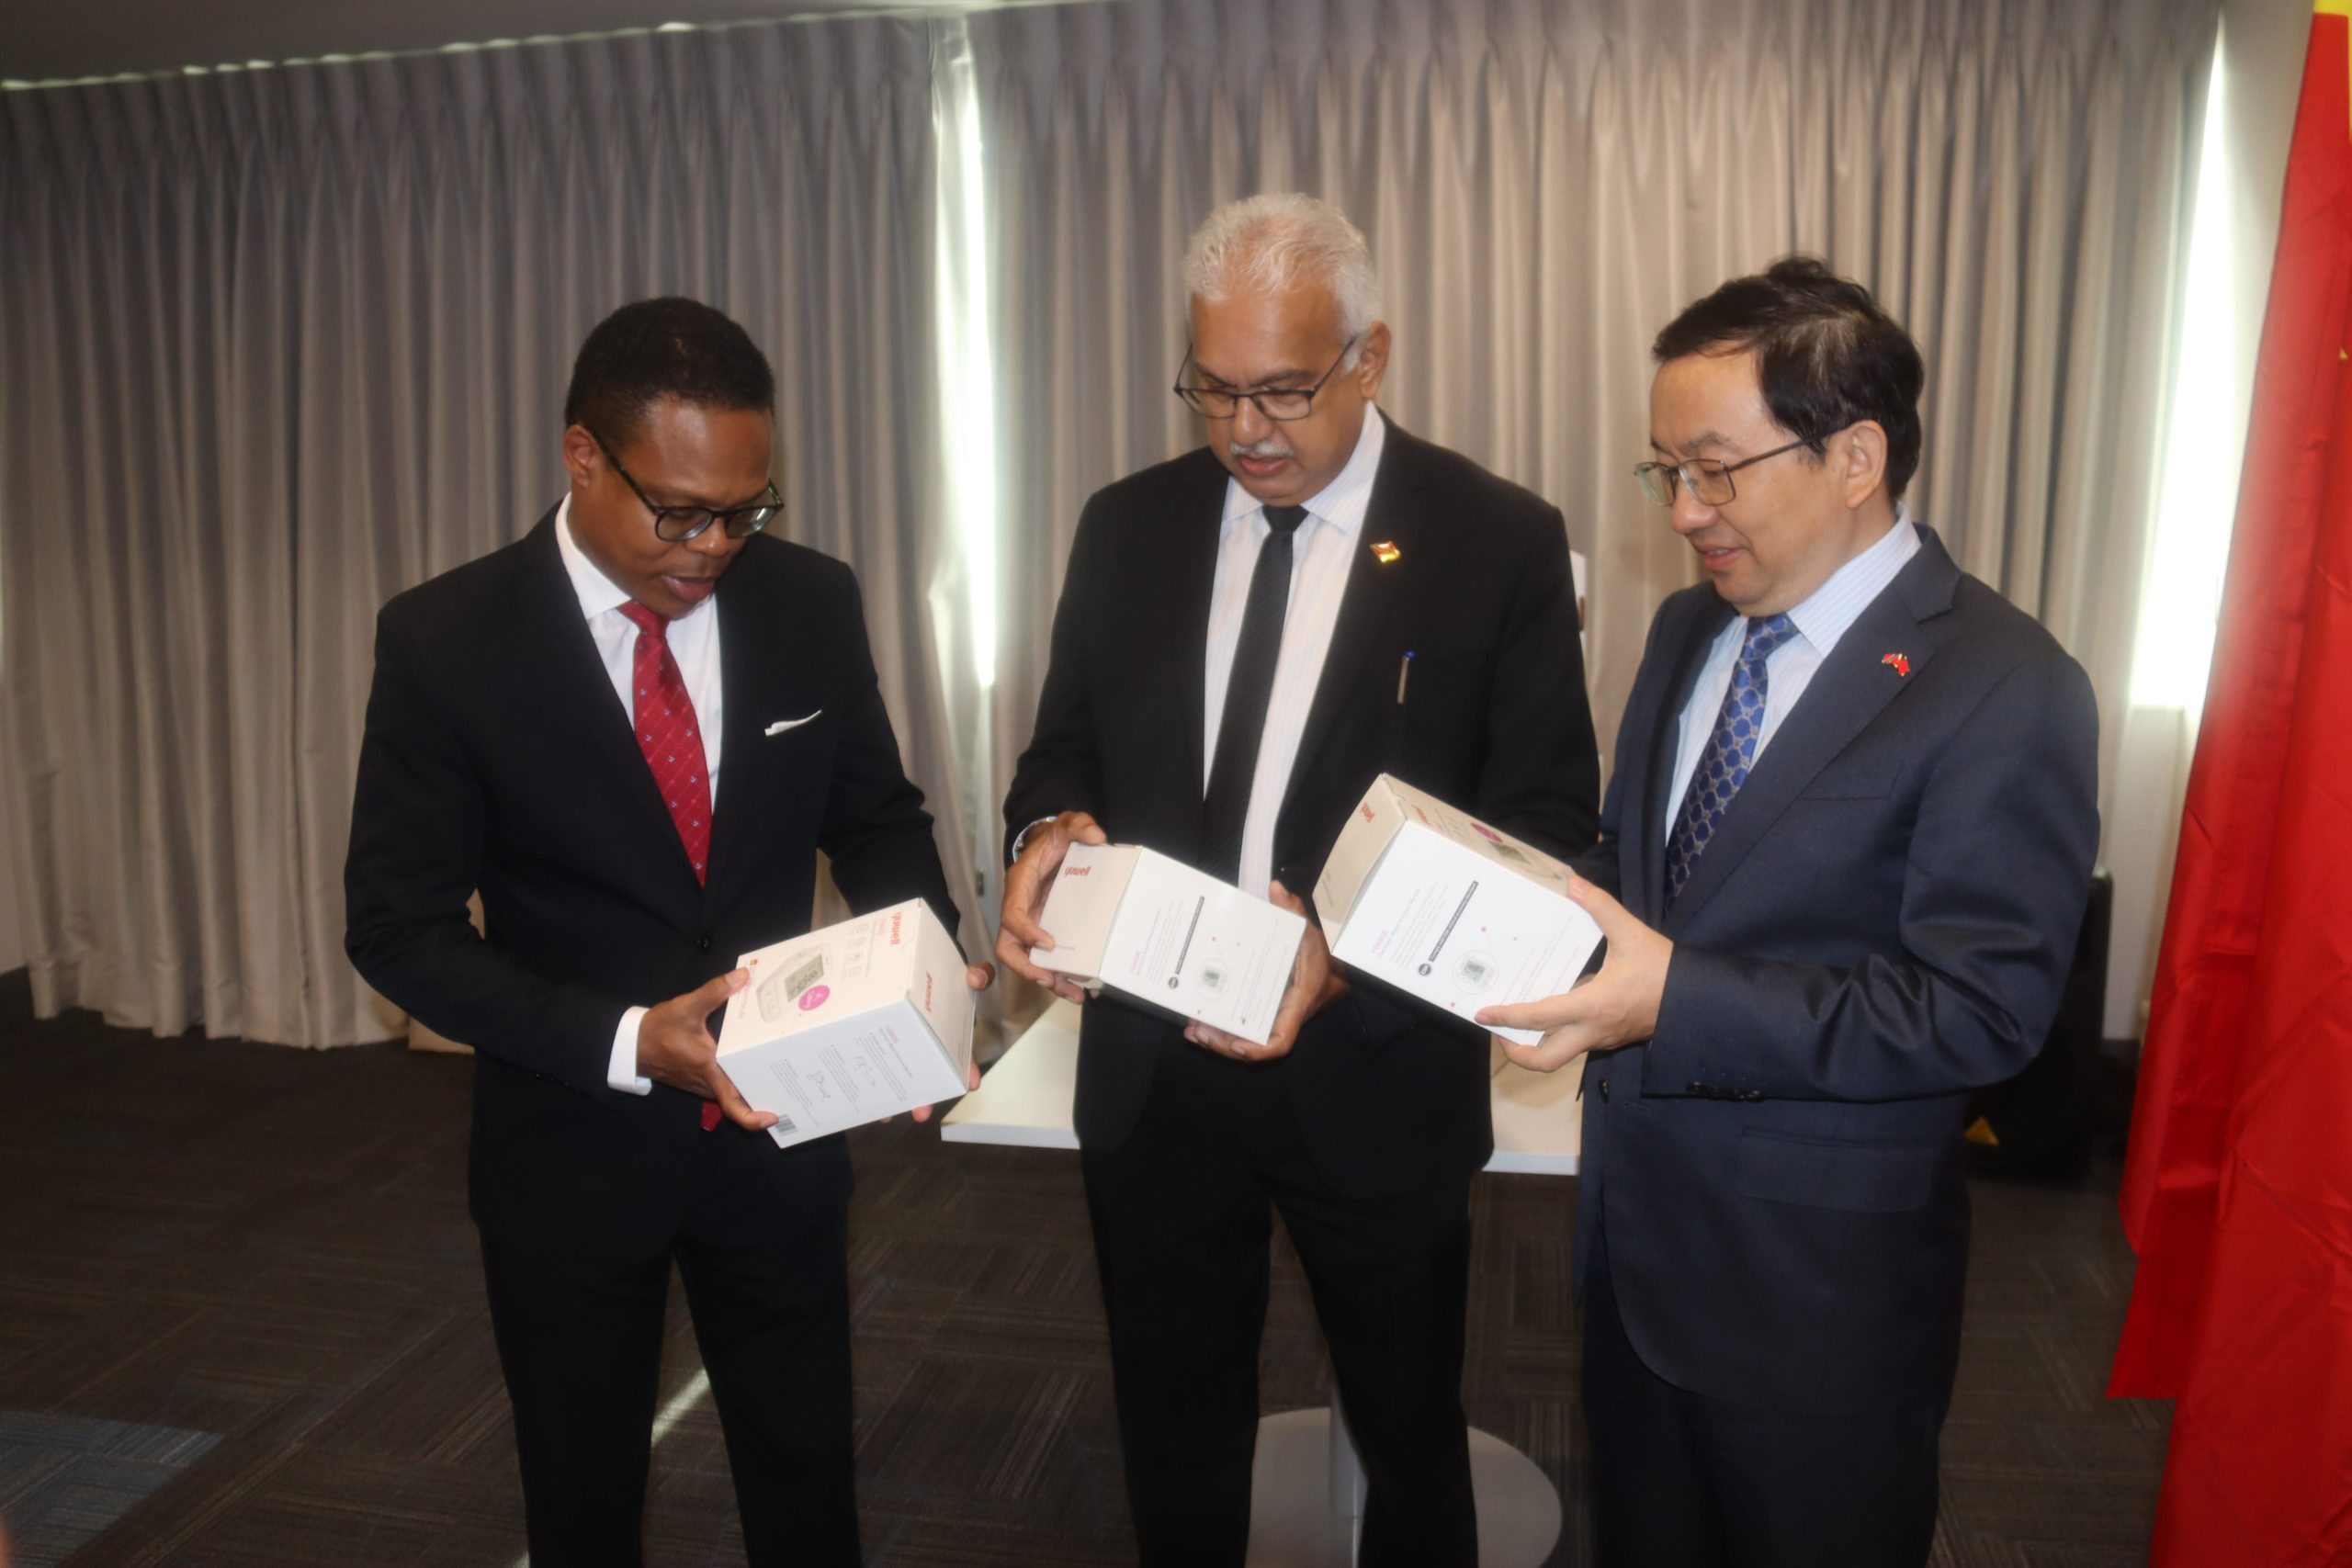 Ministry Of Health Receives A  Donation of 5000 Blood Pressure Monitors From The Government Of China